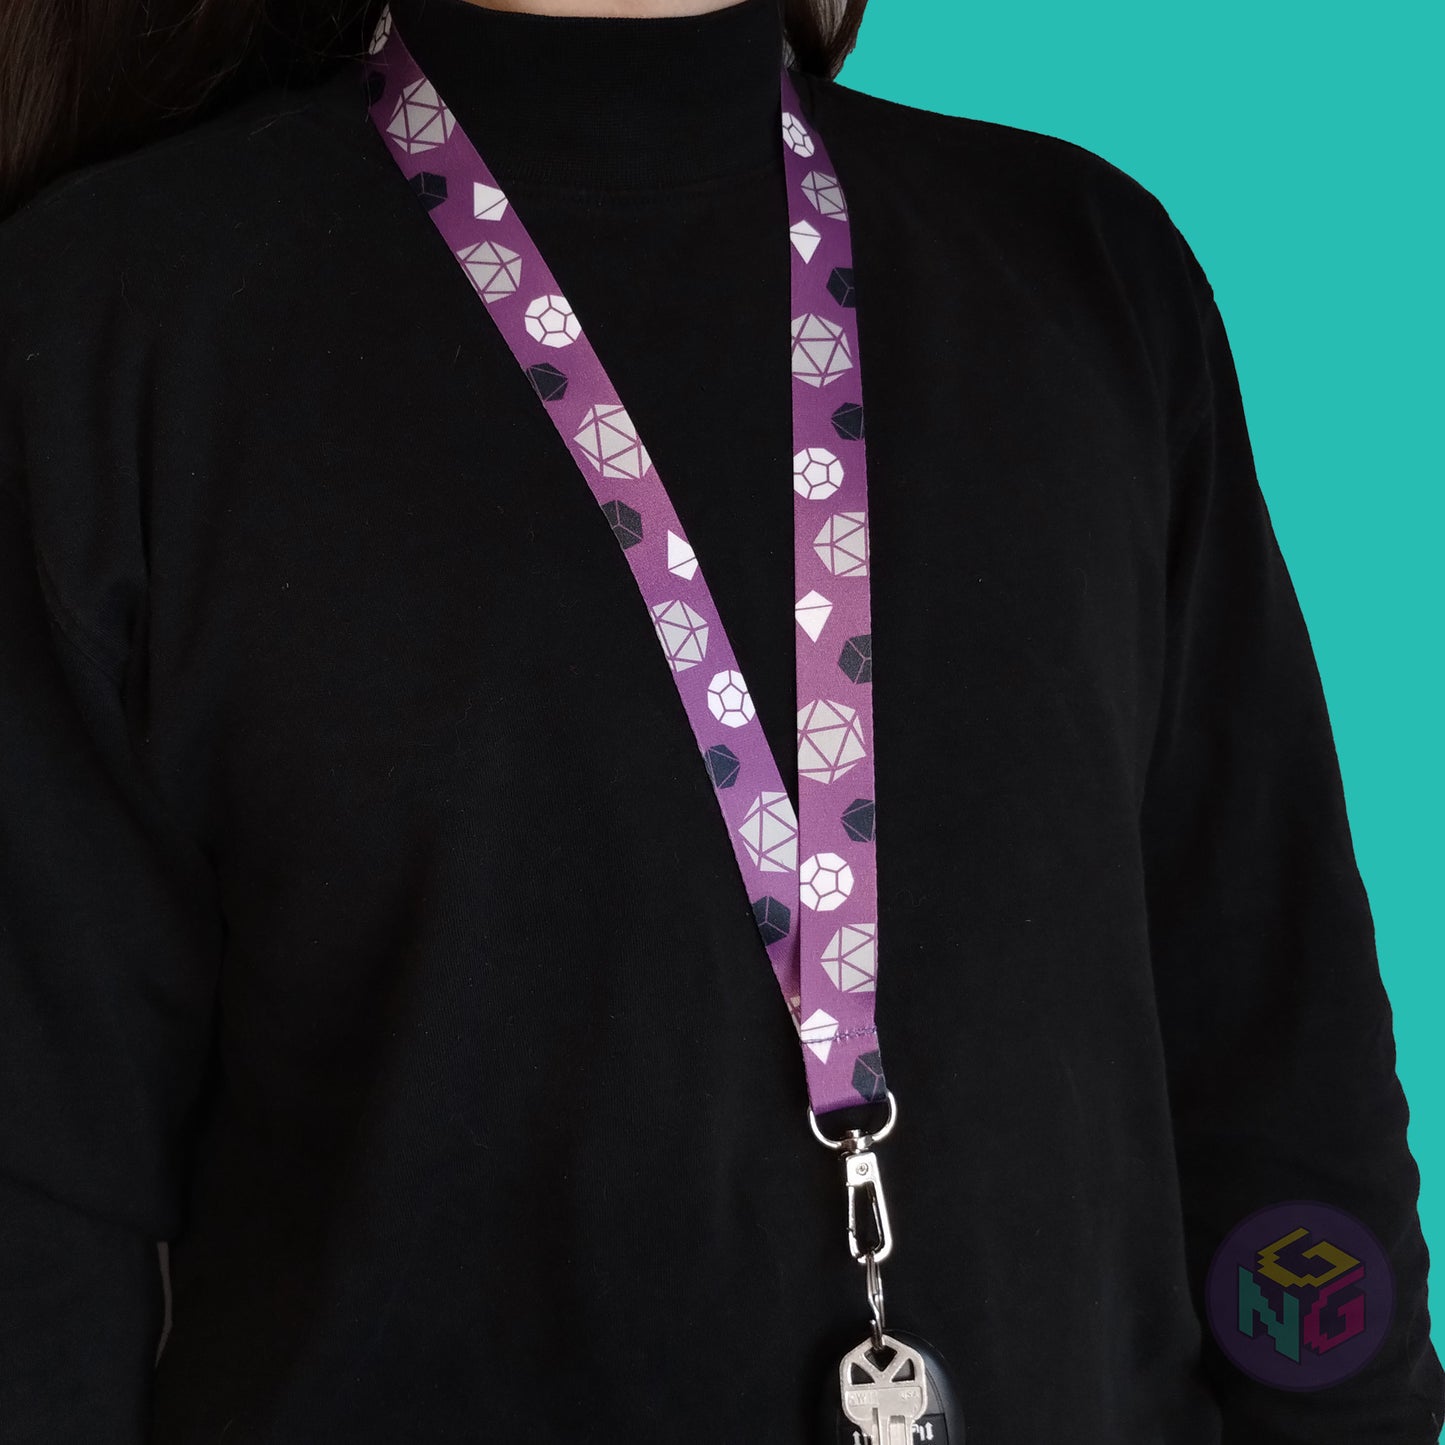 purple asexual pride lanyard being worn by a flat chested person wearing a black turtleneck. The end of the lanyard falls between their sternum and bellybutton and has a key fob clipped to the end